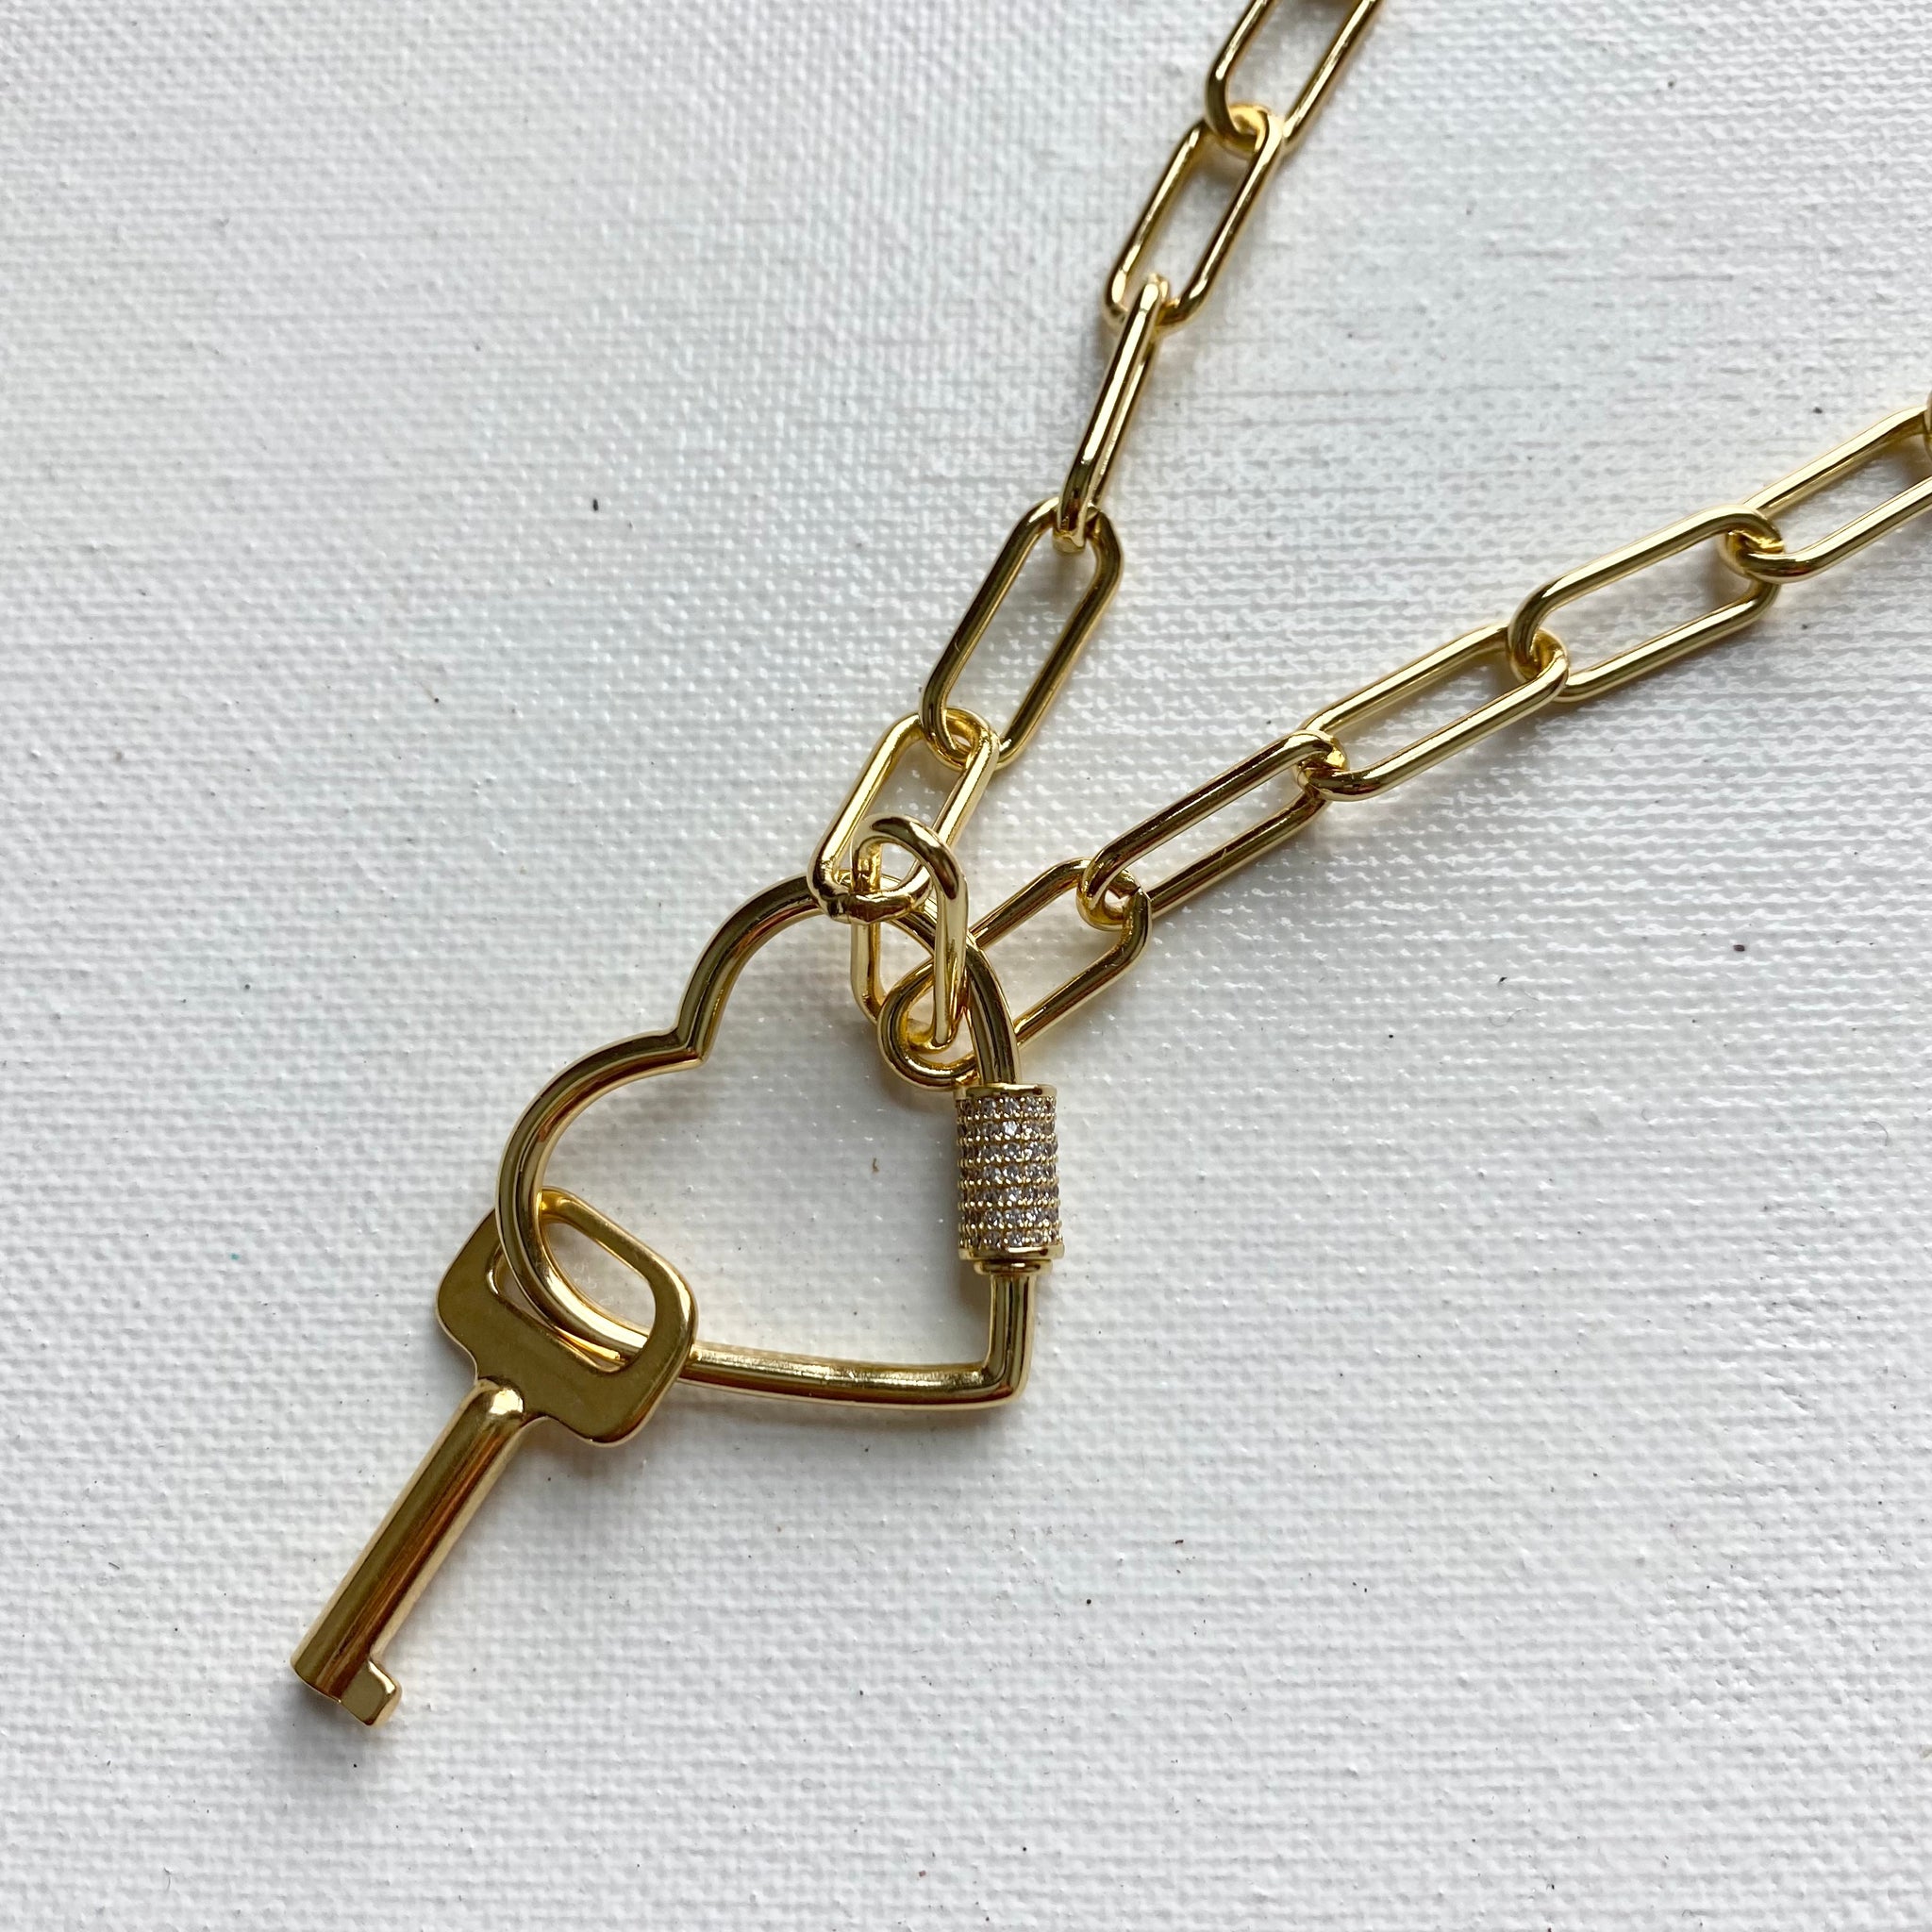 Small Vintage Gold Repurposed Louis Vuitton Key Charm Necklace